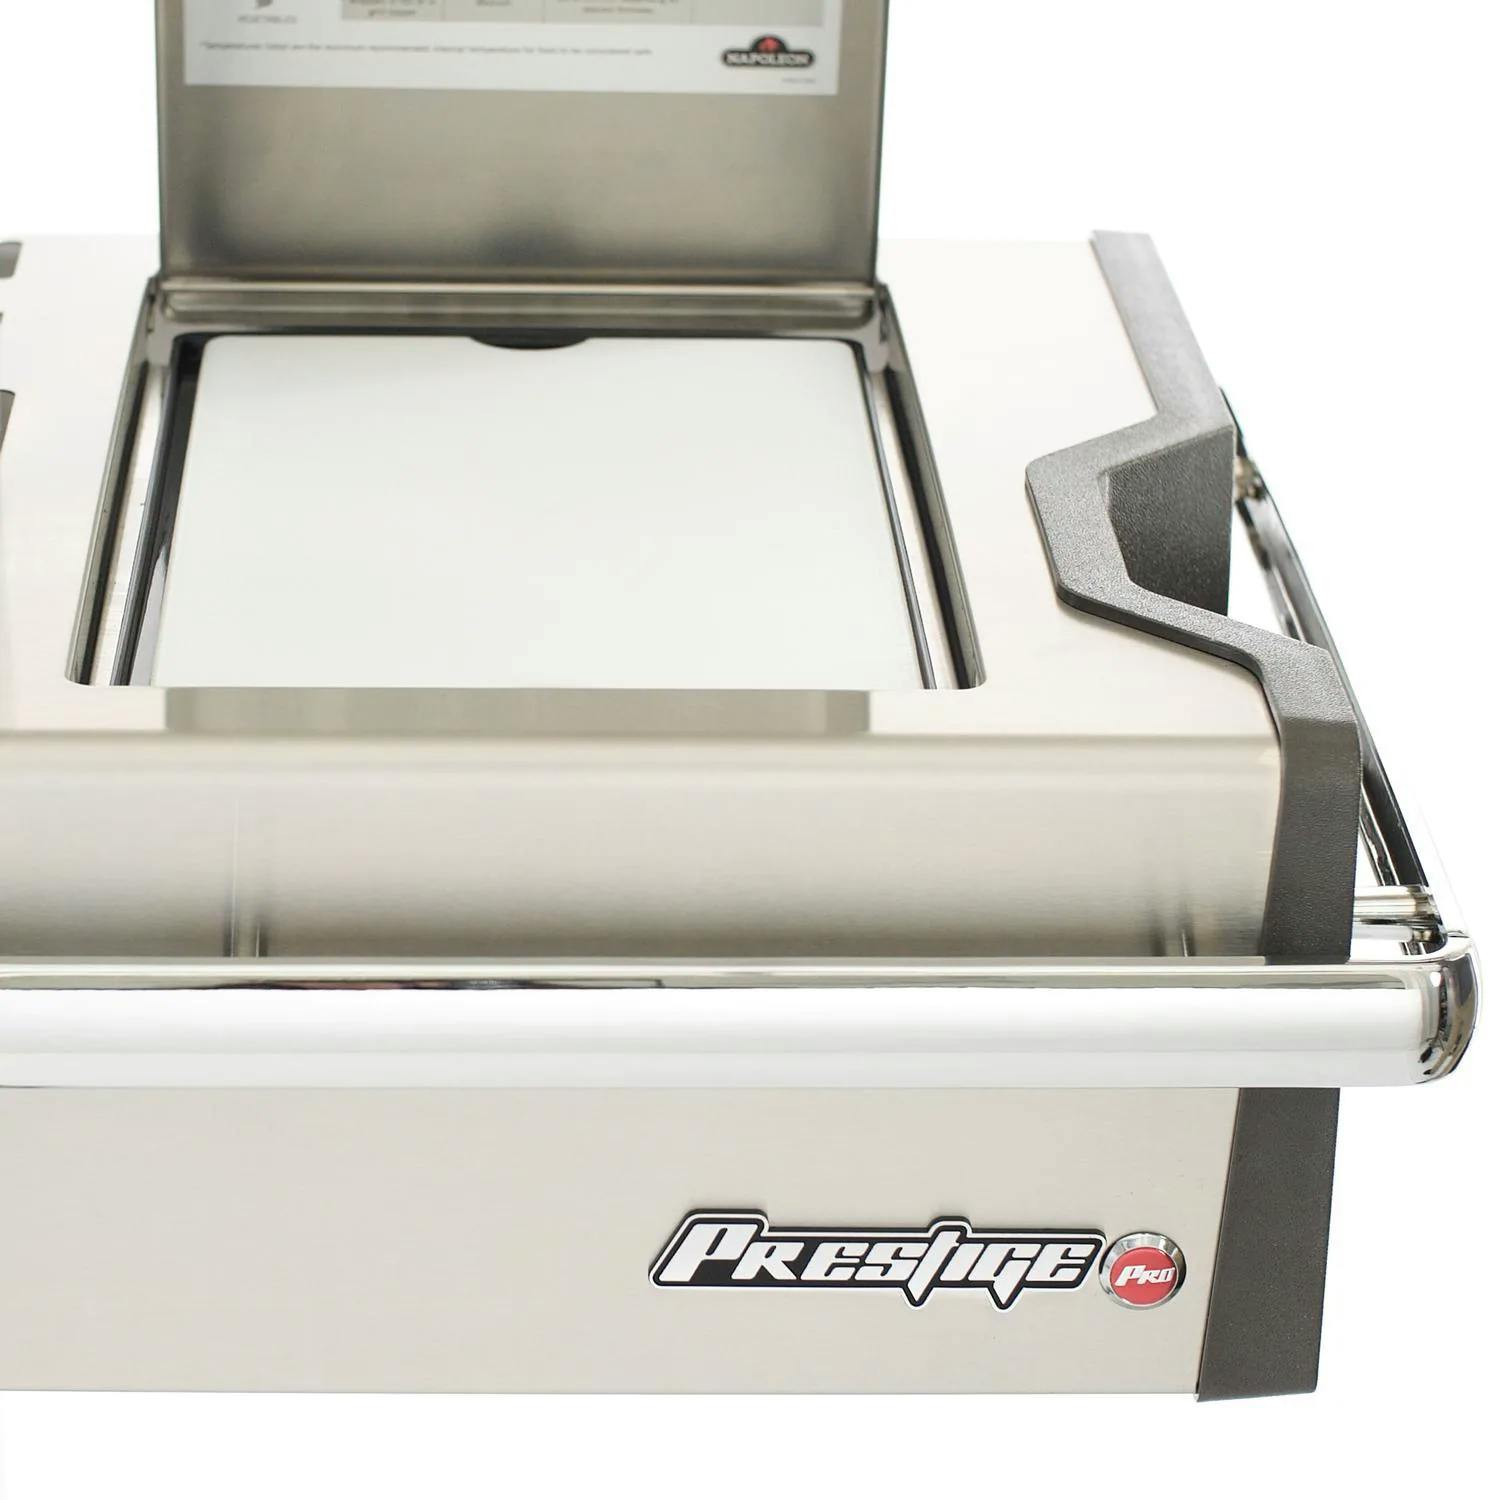 Napoleon Prestige PRO 665 Gas Grill with Infrared Rear Burner and Infrared Side Burner and Rotisserie Kit · Propane